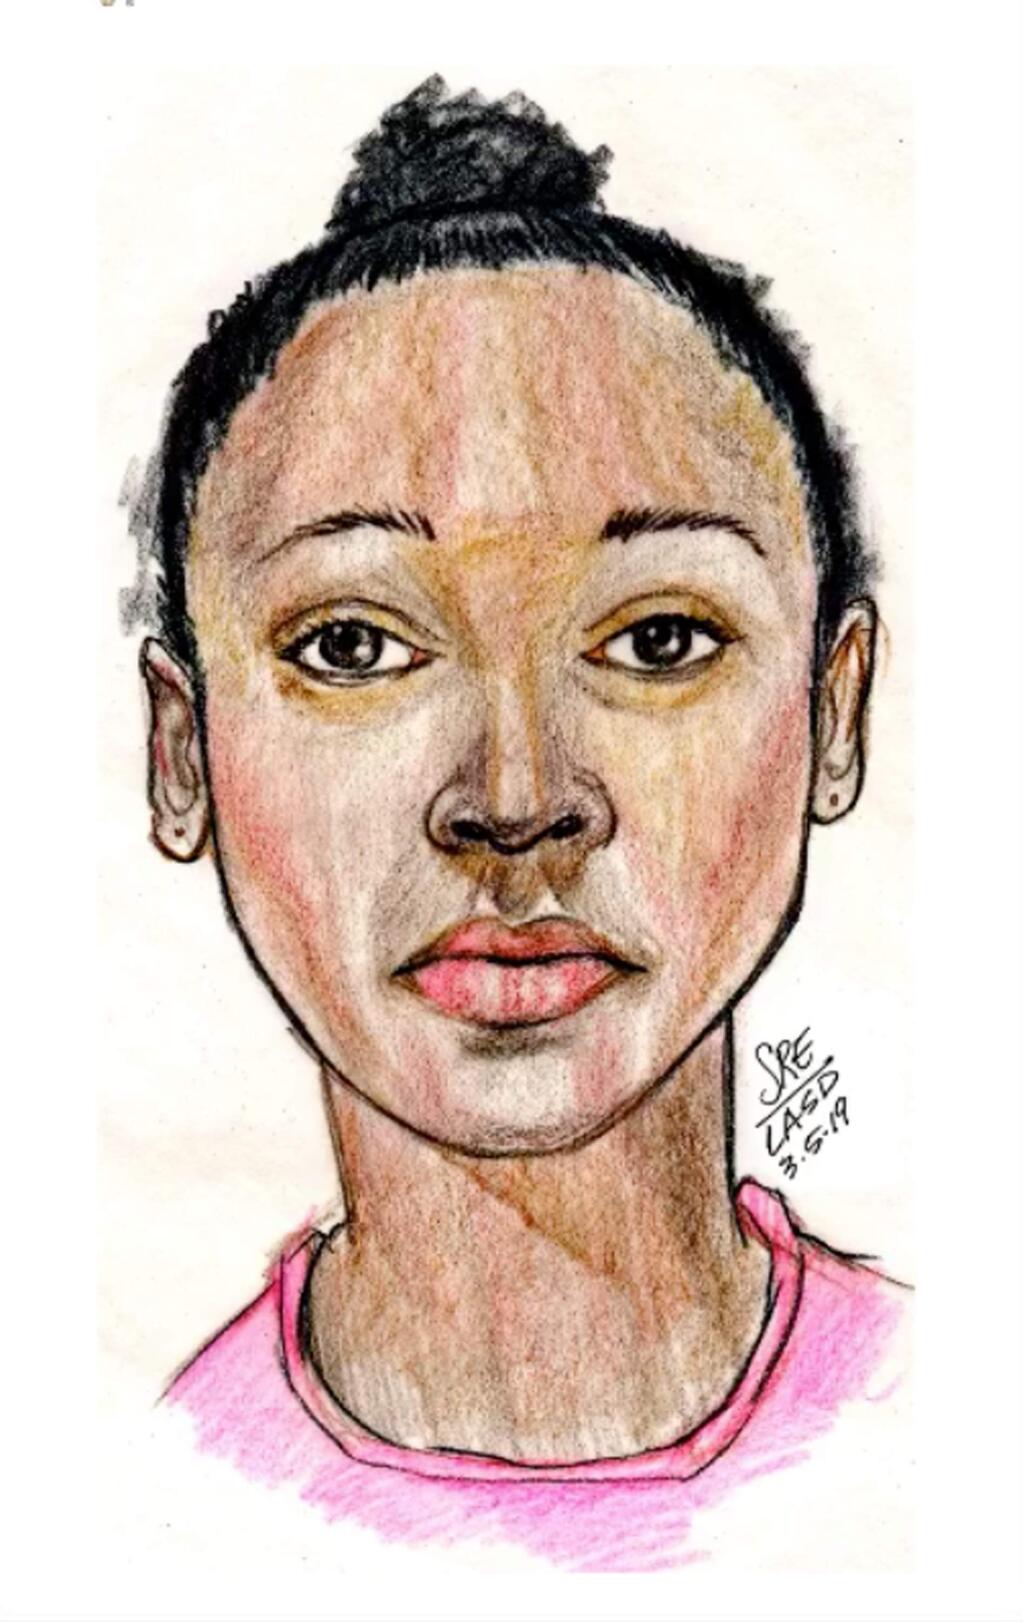 This sketch provided by the Los Angeles County Sheriff's Department shows a young girl whose body was found along a Southern California hiking trail, as they seek the public's help in identifying her. The child is believed to be between 8 and 13 years old. The body was discovered partially inside a duffel bag Tuesday morning, March 5, 2019, by workers landscaping a trail in Hacienda Heights southeast of Los Angeles. There's no immediate word on the cause of death but homicide detectives are investigating. (Los Angeles County Sheriff's Department via AP)